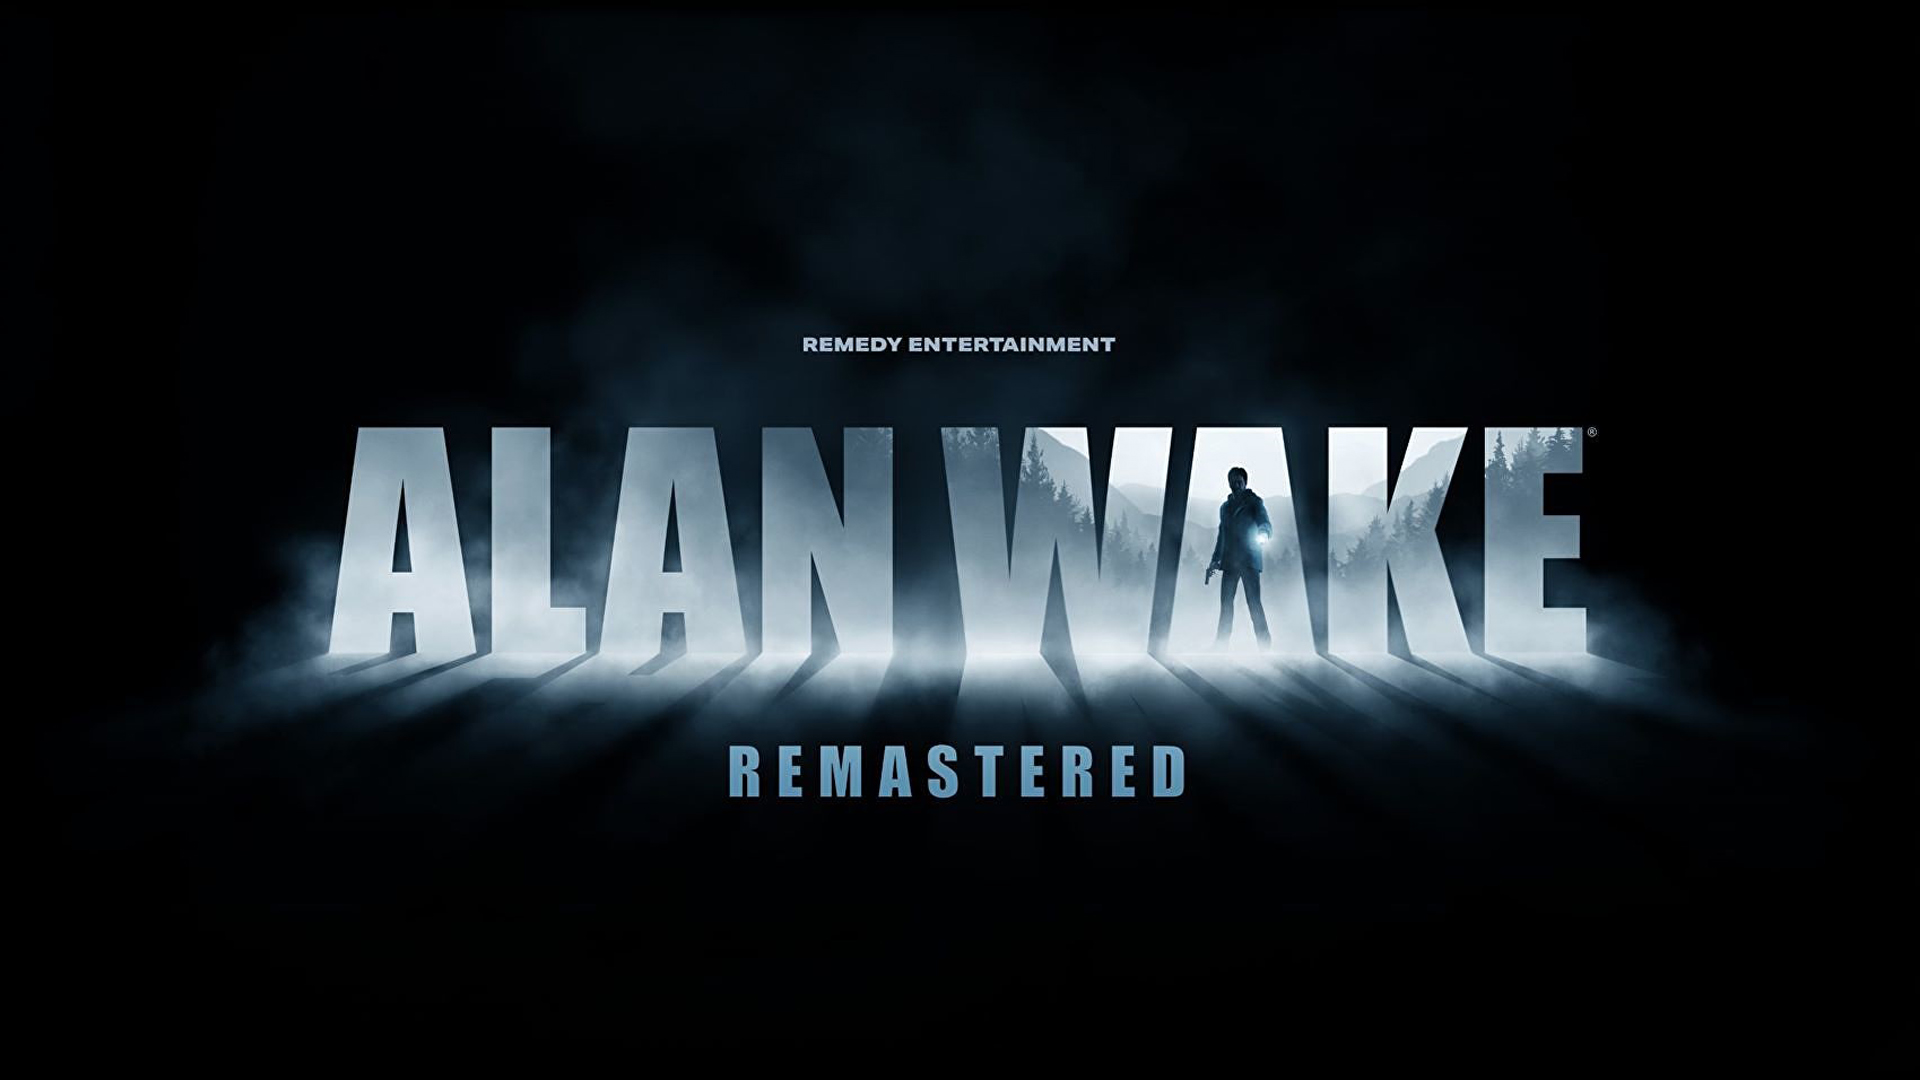 Is Alan Wake 2 Going To Be On Steam?